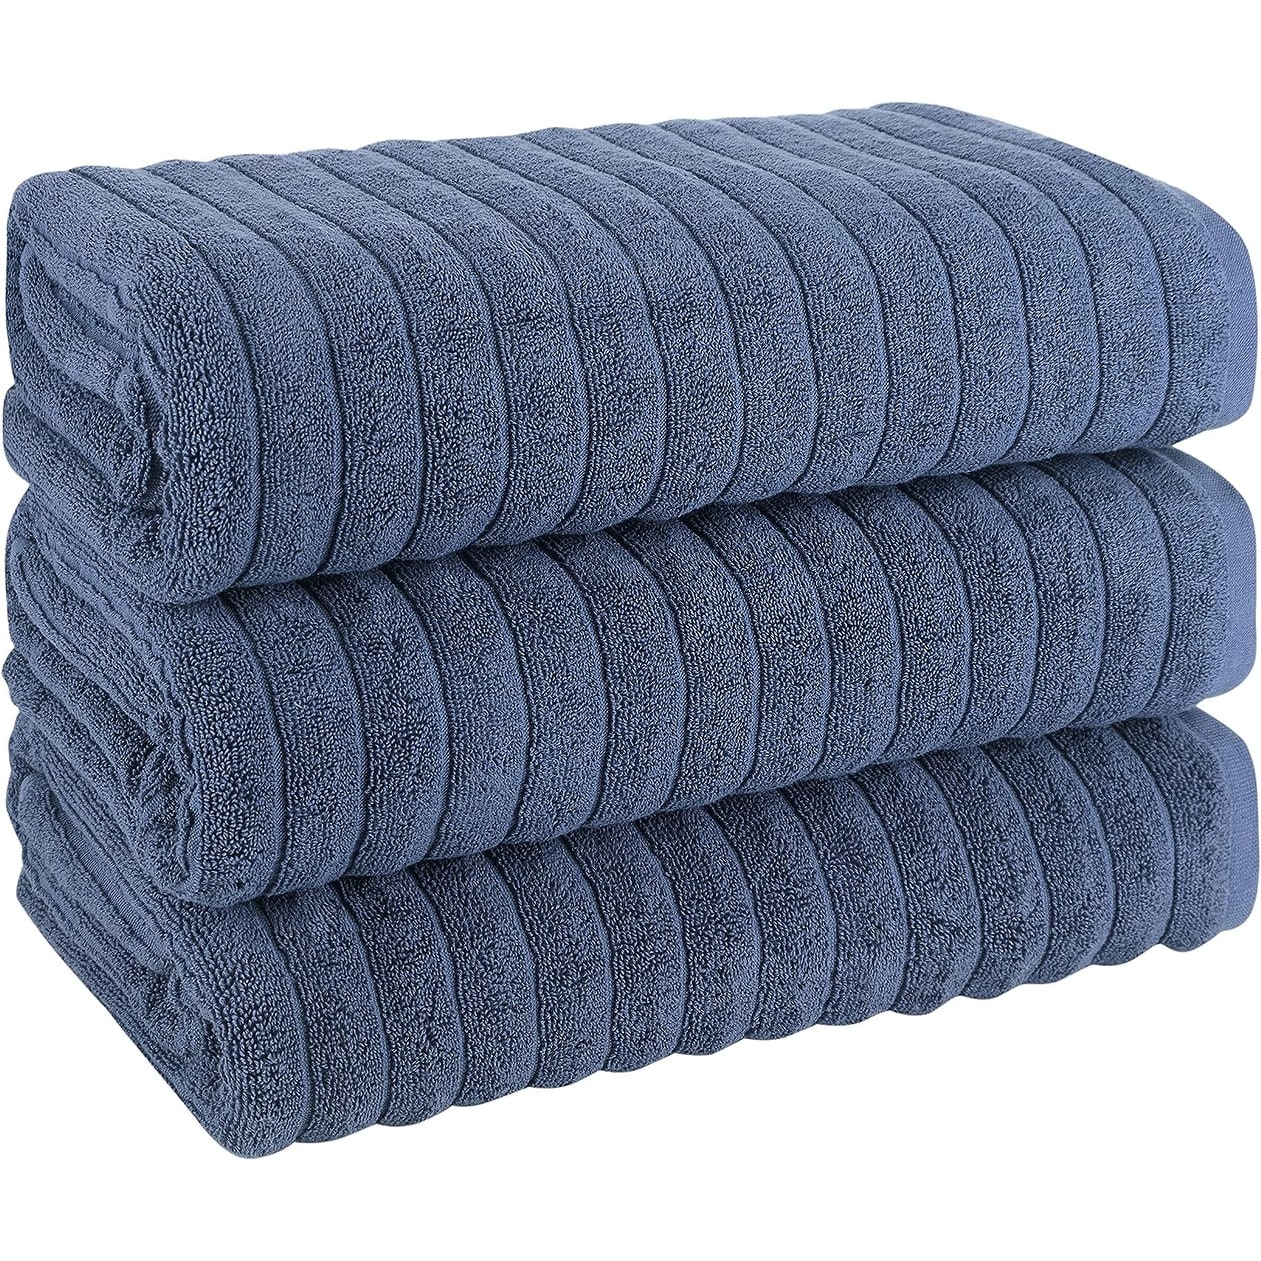 https://ak1.ostkcdn.com/images/products/is/images/direct/1003499b76346c5404f0ea67700529a3e4ee857c/Classic-Turkish-Towels-Plush-Ribbed-Cotton-Luxurious-Bath-Sheets-%28Set-of-3%29-40x65%22.jpg